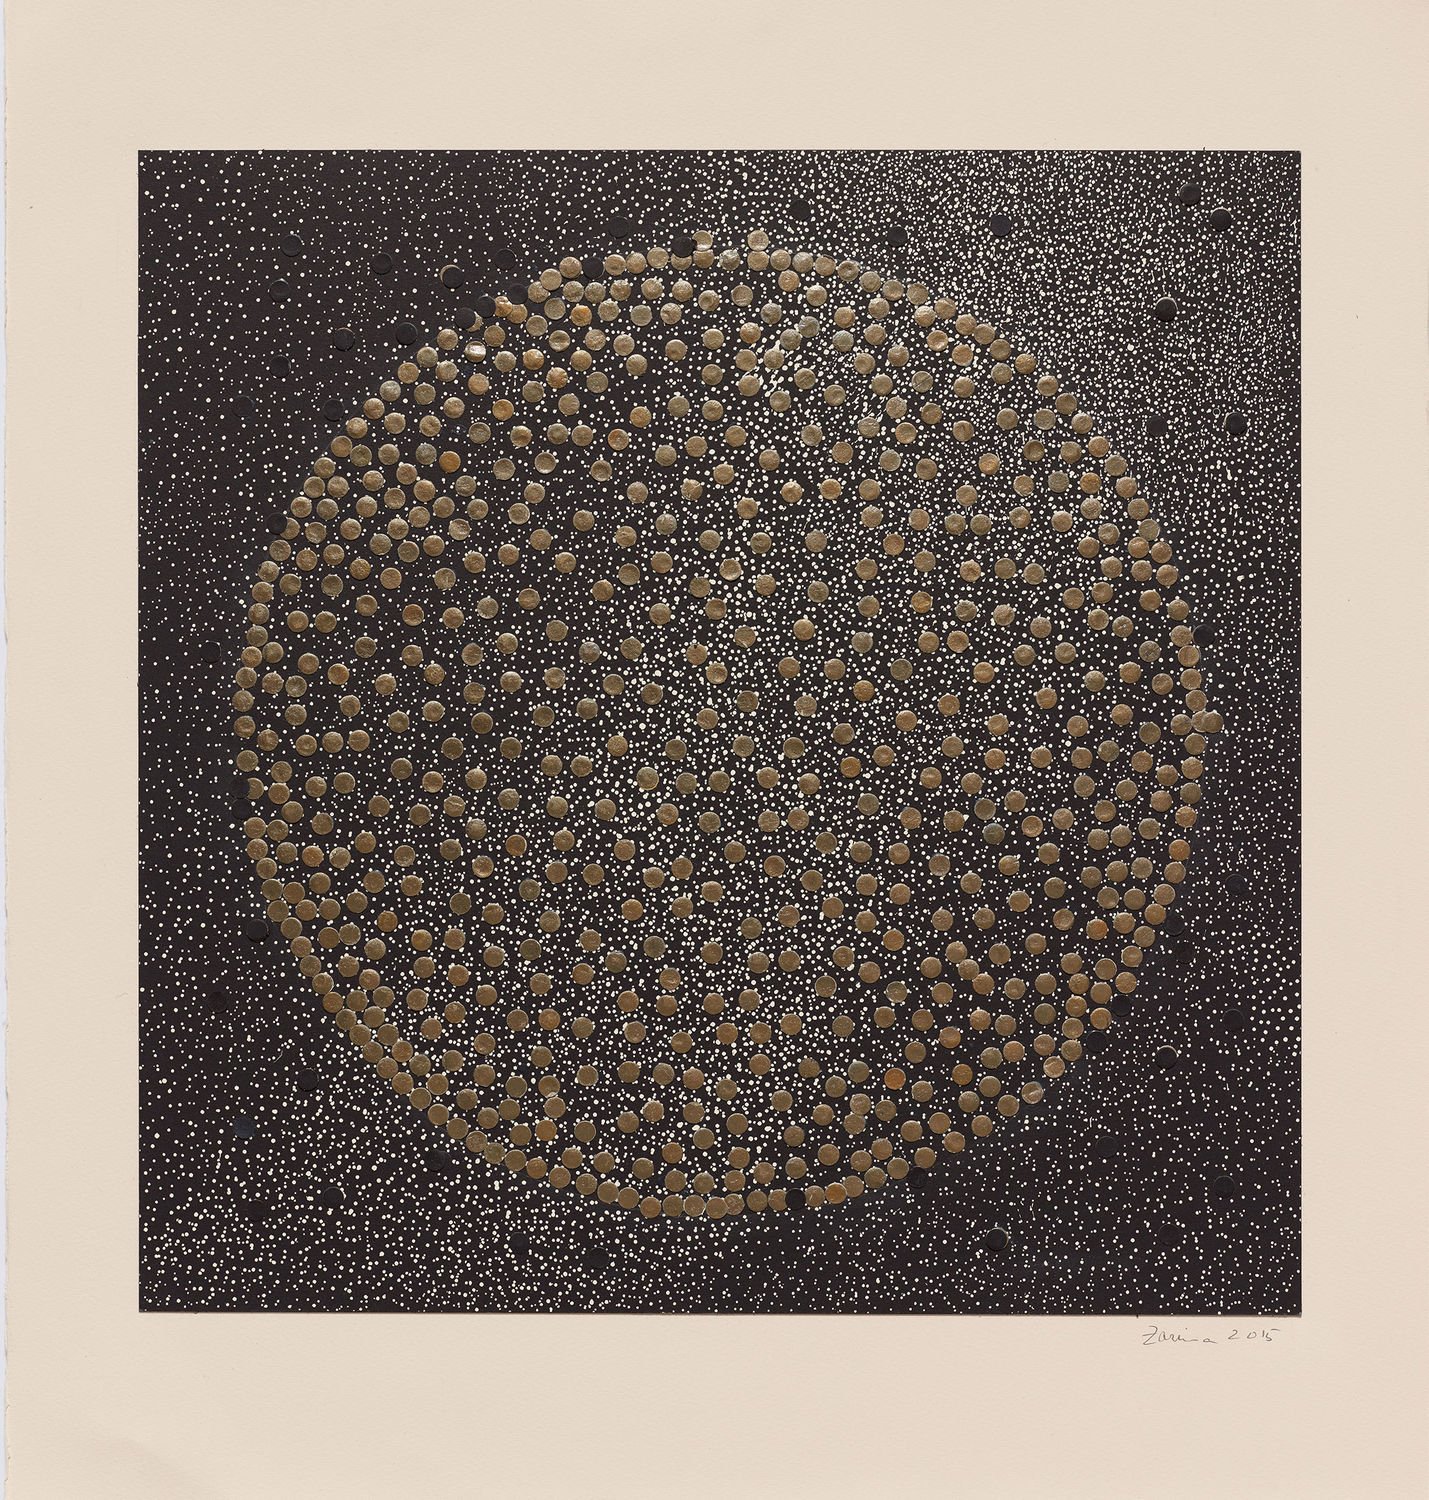  Zarina, Untitled, 2015  Woodcut printed on BFK light paper collaged with pewter leaf and printed black paper mounted on Somerset Antique paper. Sheet: 23 1/2 × 22 in. 